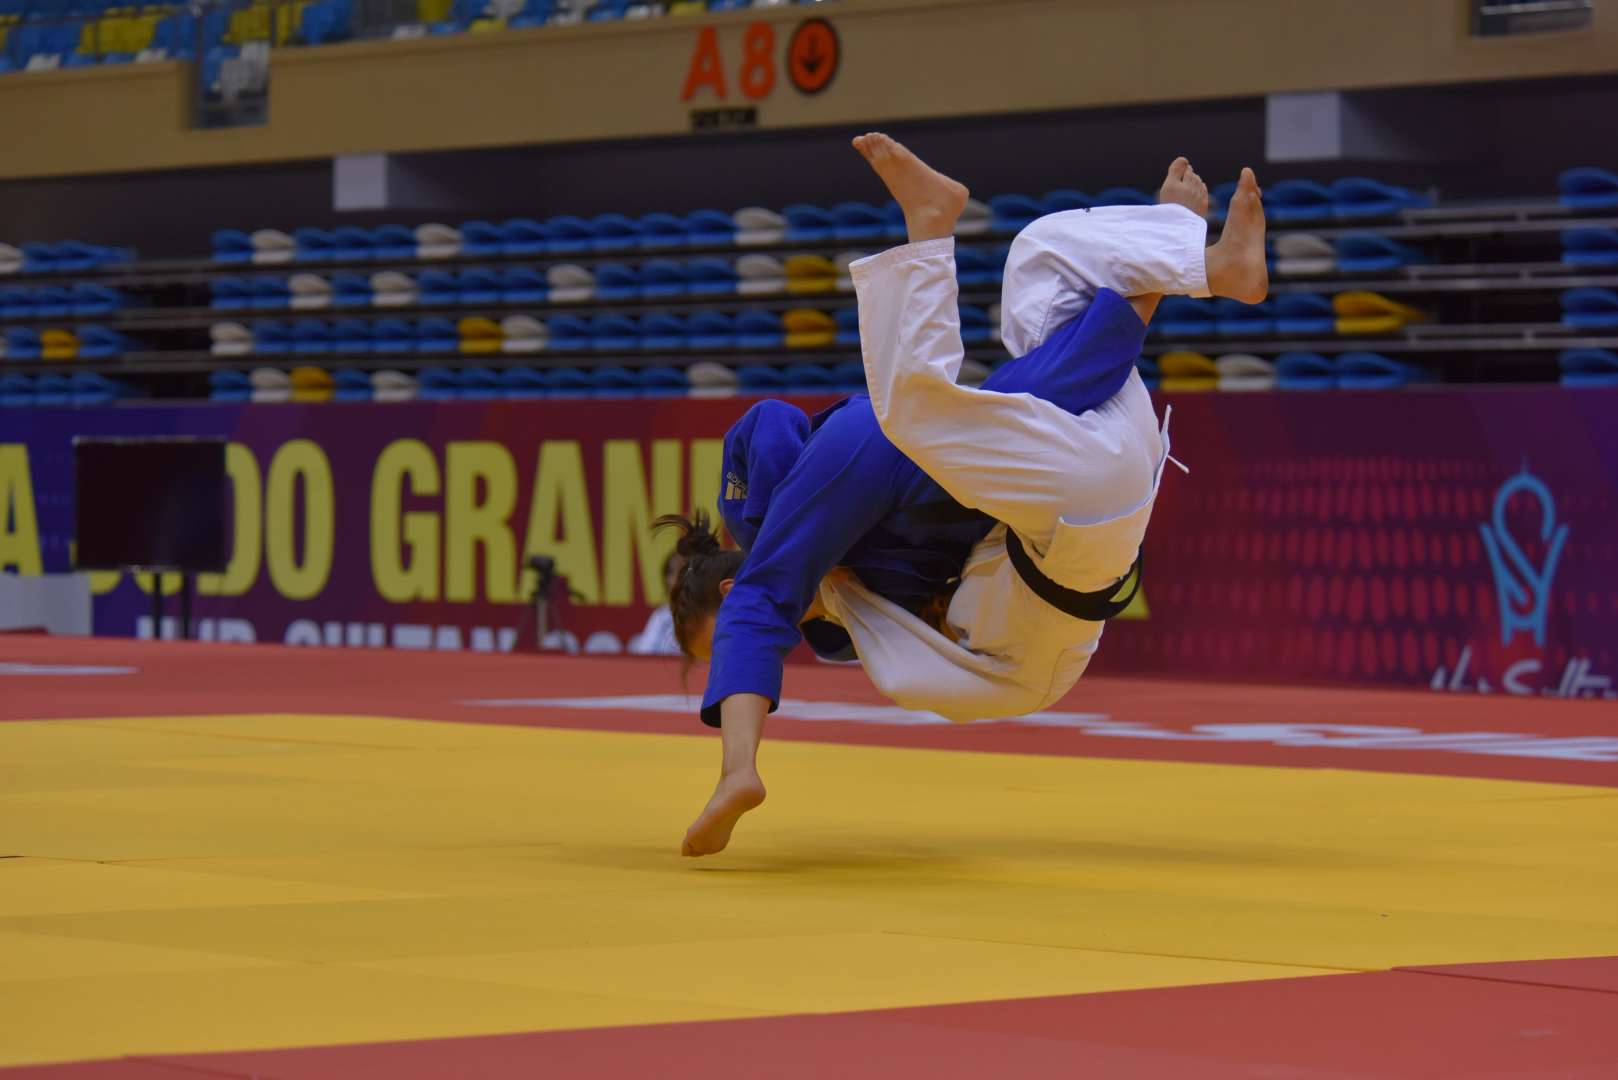 India win first ever medal at the IBSA Judo Grand Prix_30.1